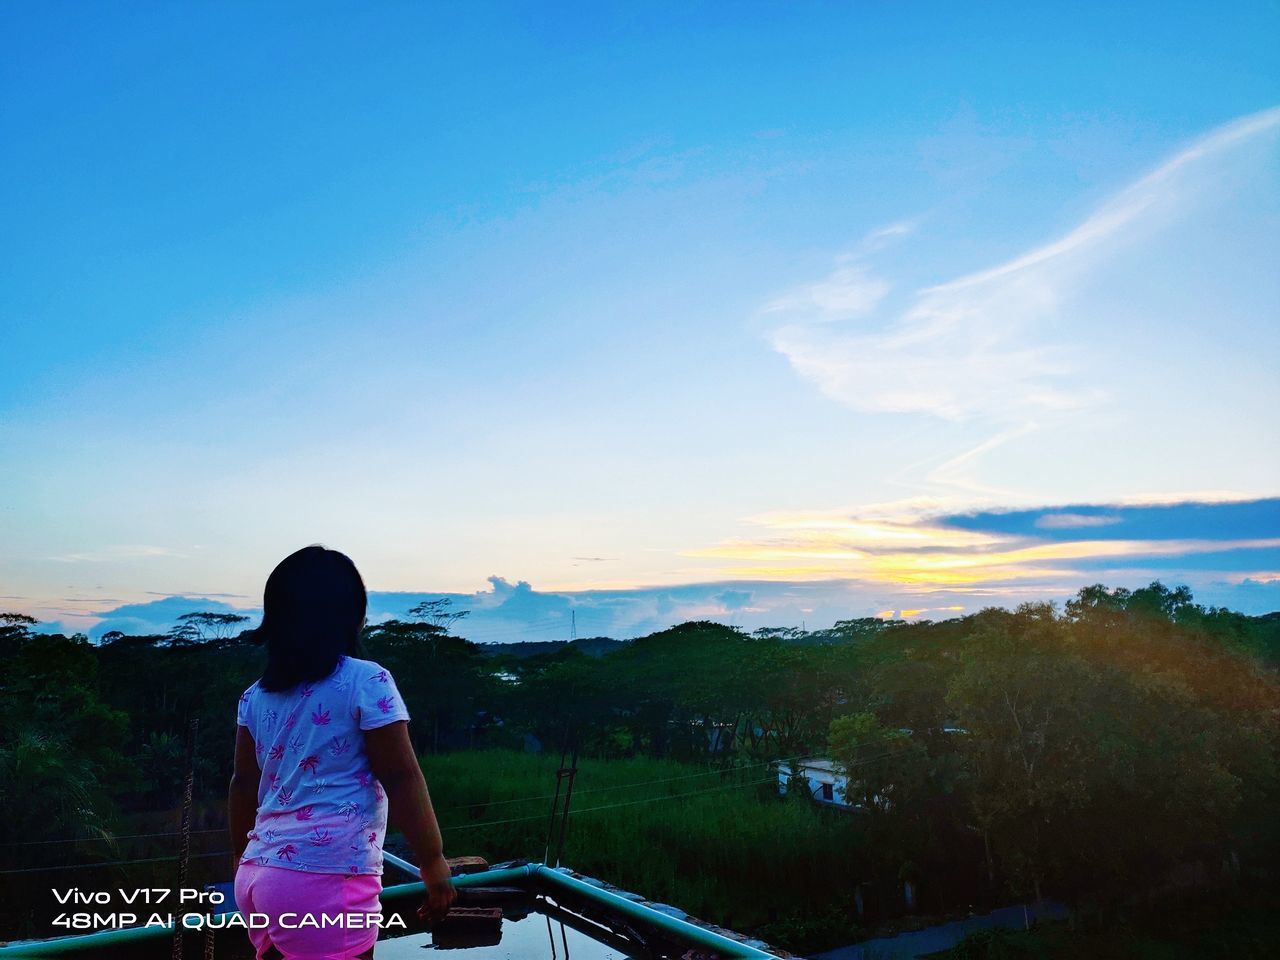 sky, one person, horizon, nature, rear view, mountain, adult, beauty in nature, morning, cloud, women, scenics - nature, blue, vacation, landscape, sunlight, leisure activity, tranquility, lifestyles, environment, standing, looking at view, water, trip, sea, dusk, tranquil scene, holiday, architecture, land, outdoors, clothing, person, travel, copy space, relaxation, tree, child, casual clothing, female, travel destinations, three quarter length, mountain range, waist up, reflection, childhood, activity, day